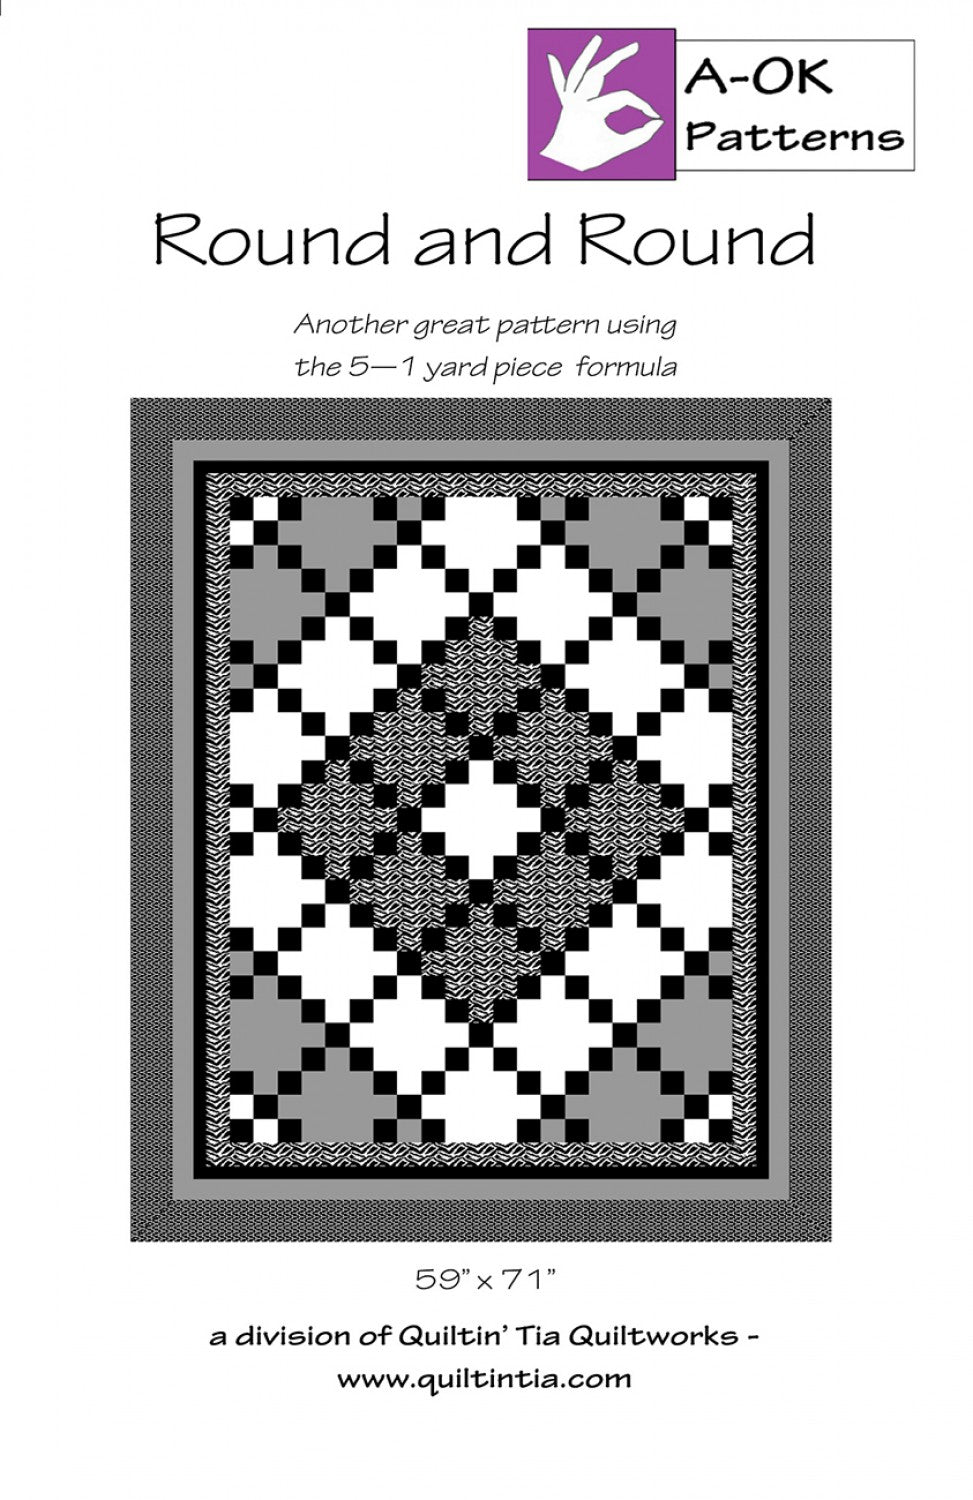 Round and Round (5 Yard Pattern) by A-OK Patterns - PAPER Pattern